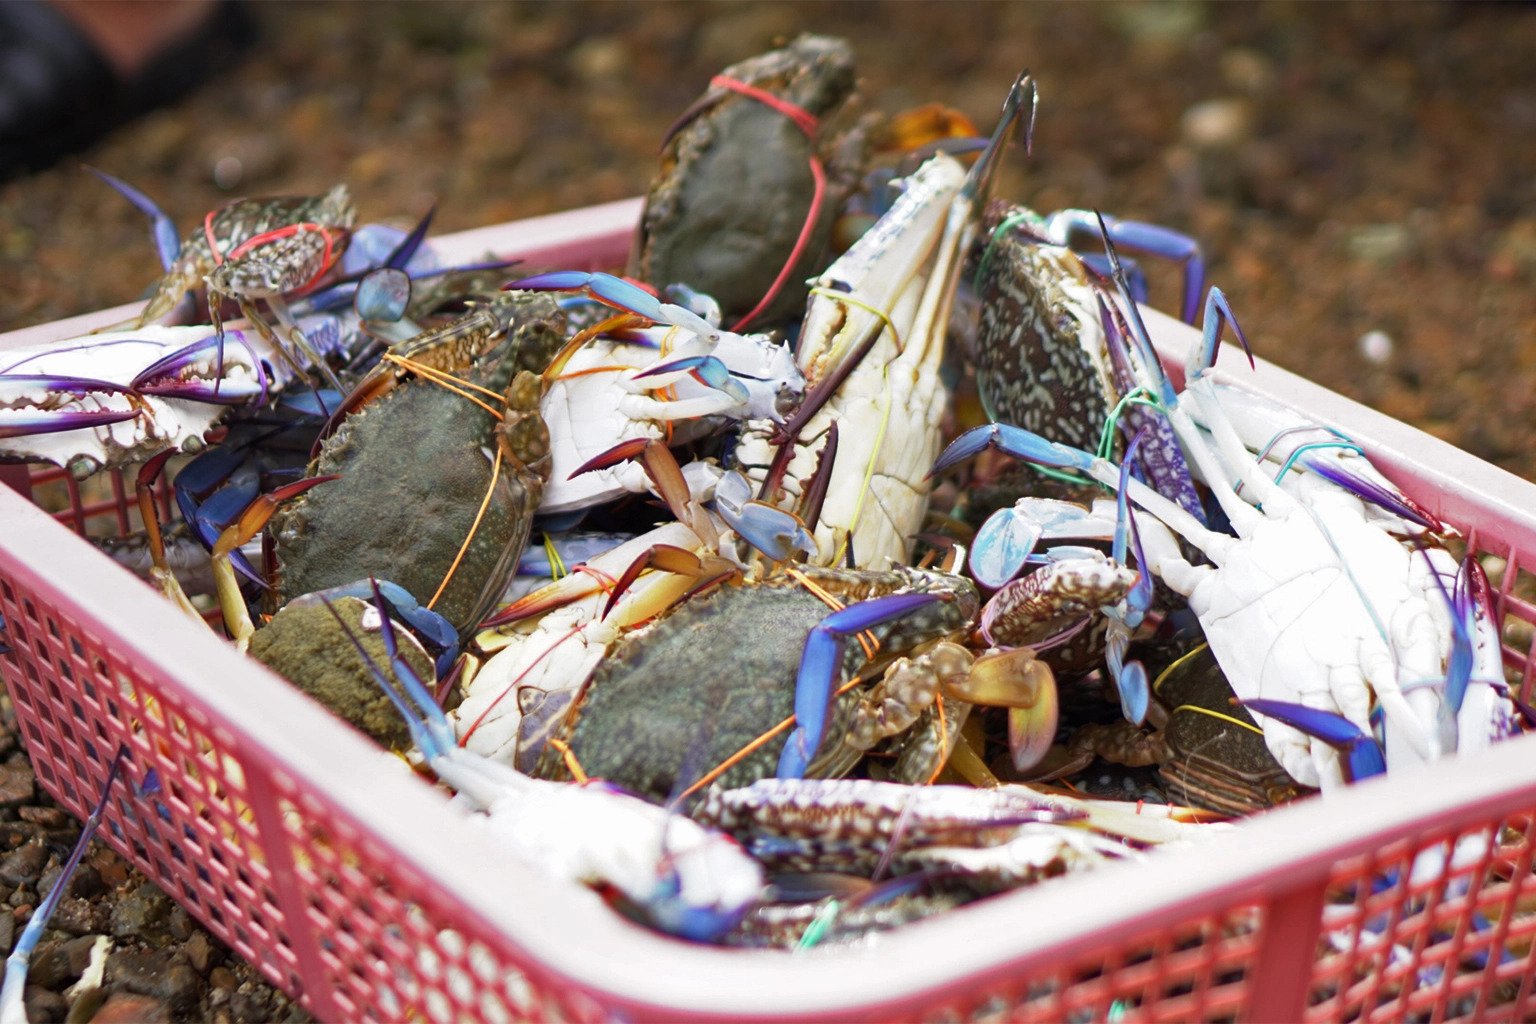 Crabs caught by Panchito Calamare in the mangroves along with fish. Image by Keith Fabro for Mongabay.